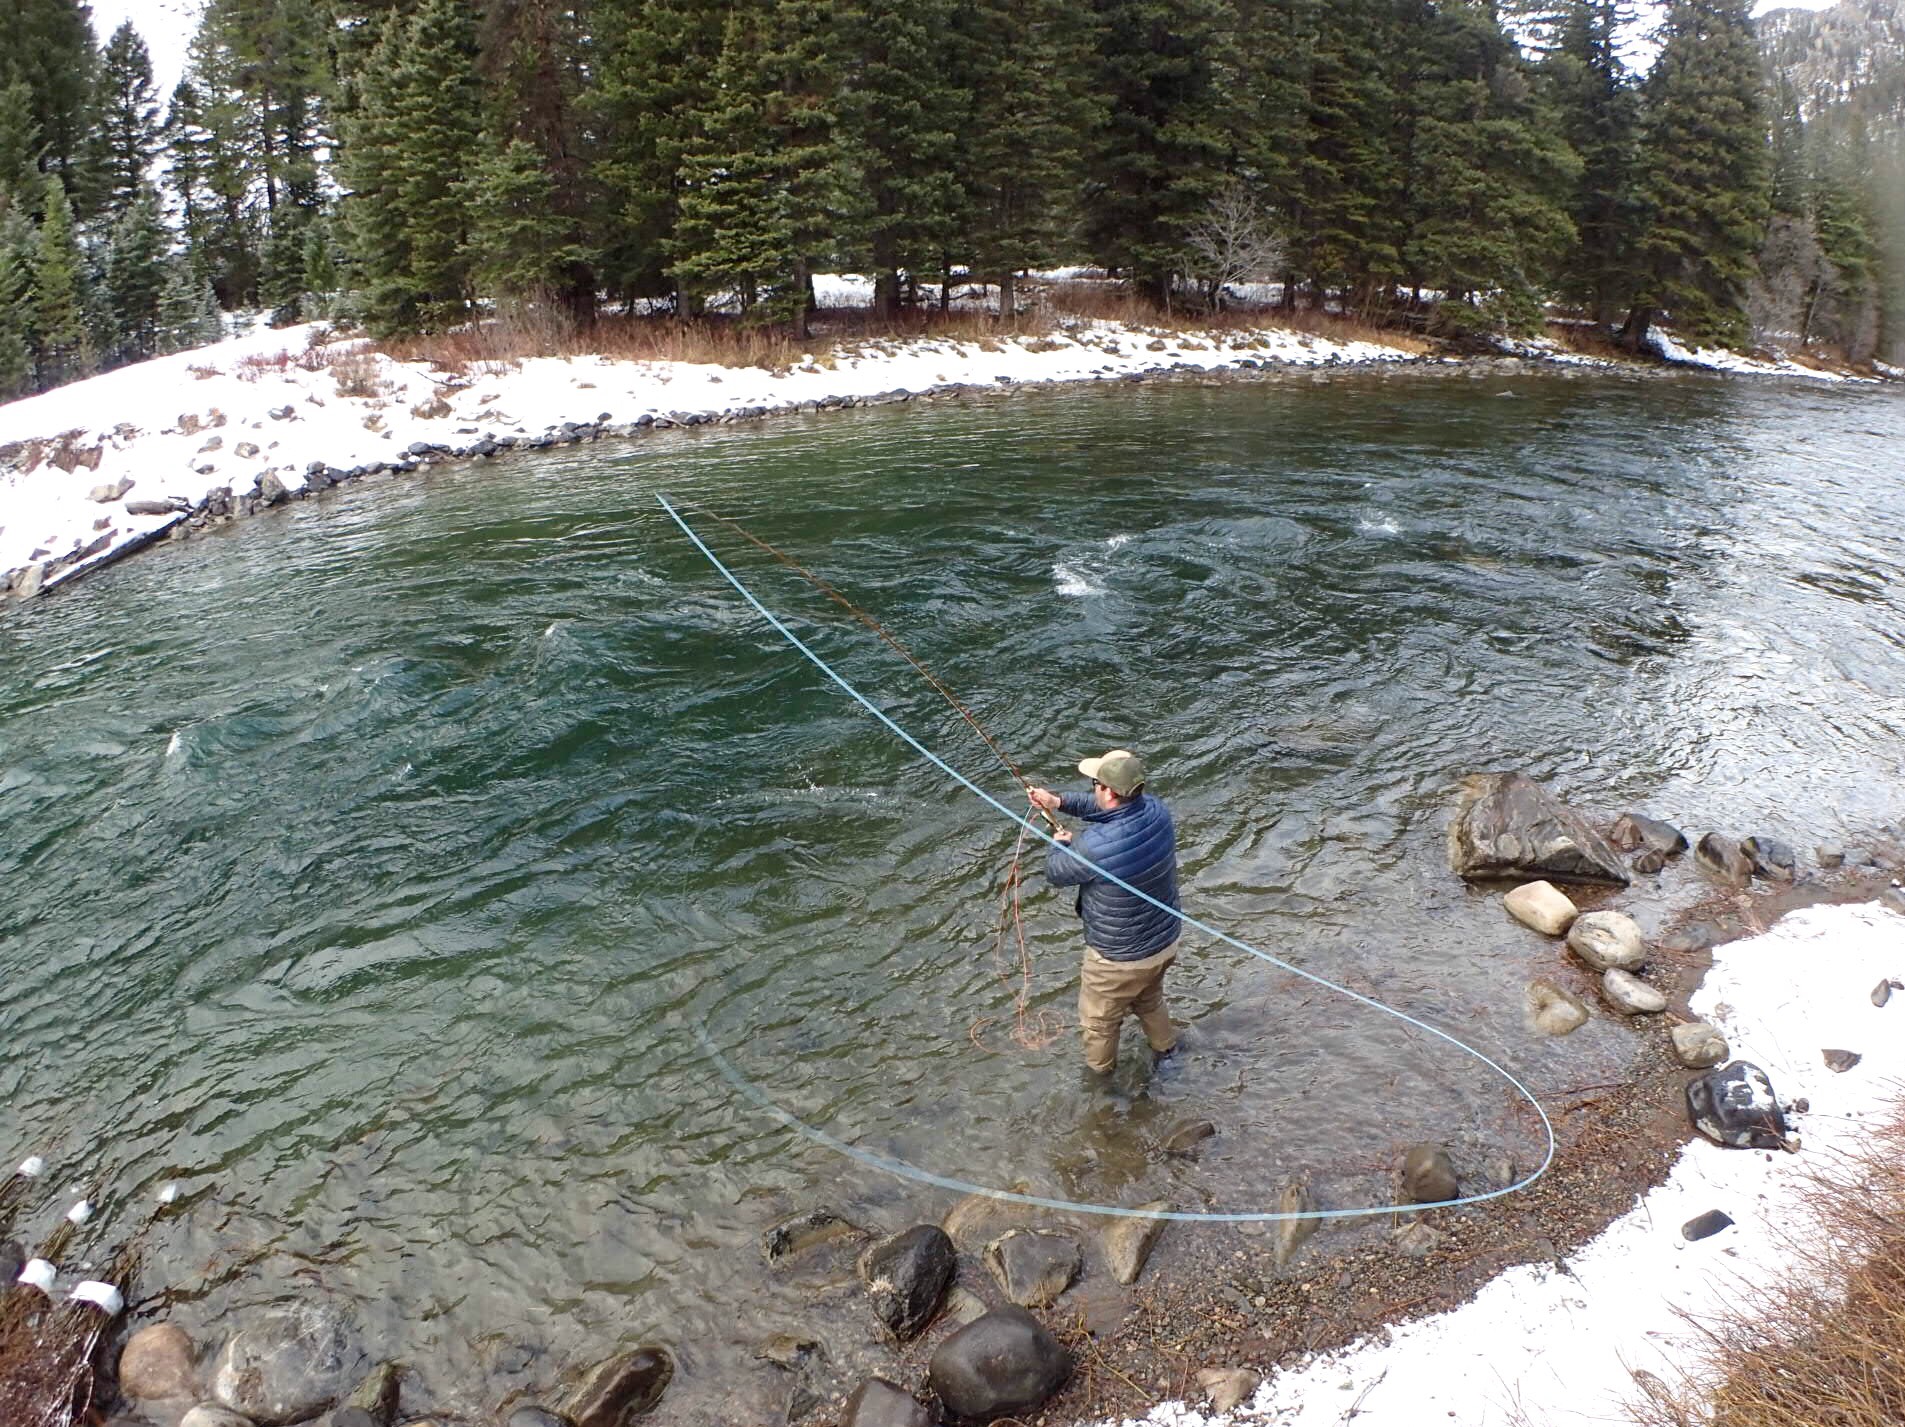 Eddy Line: What's the deal with these funny spey rods?